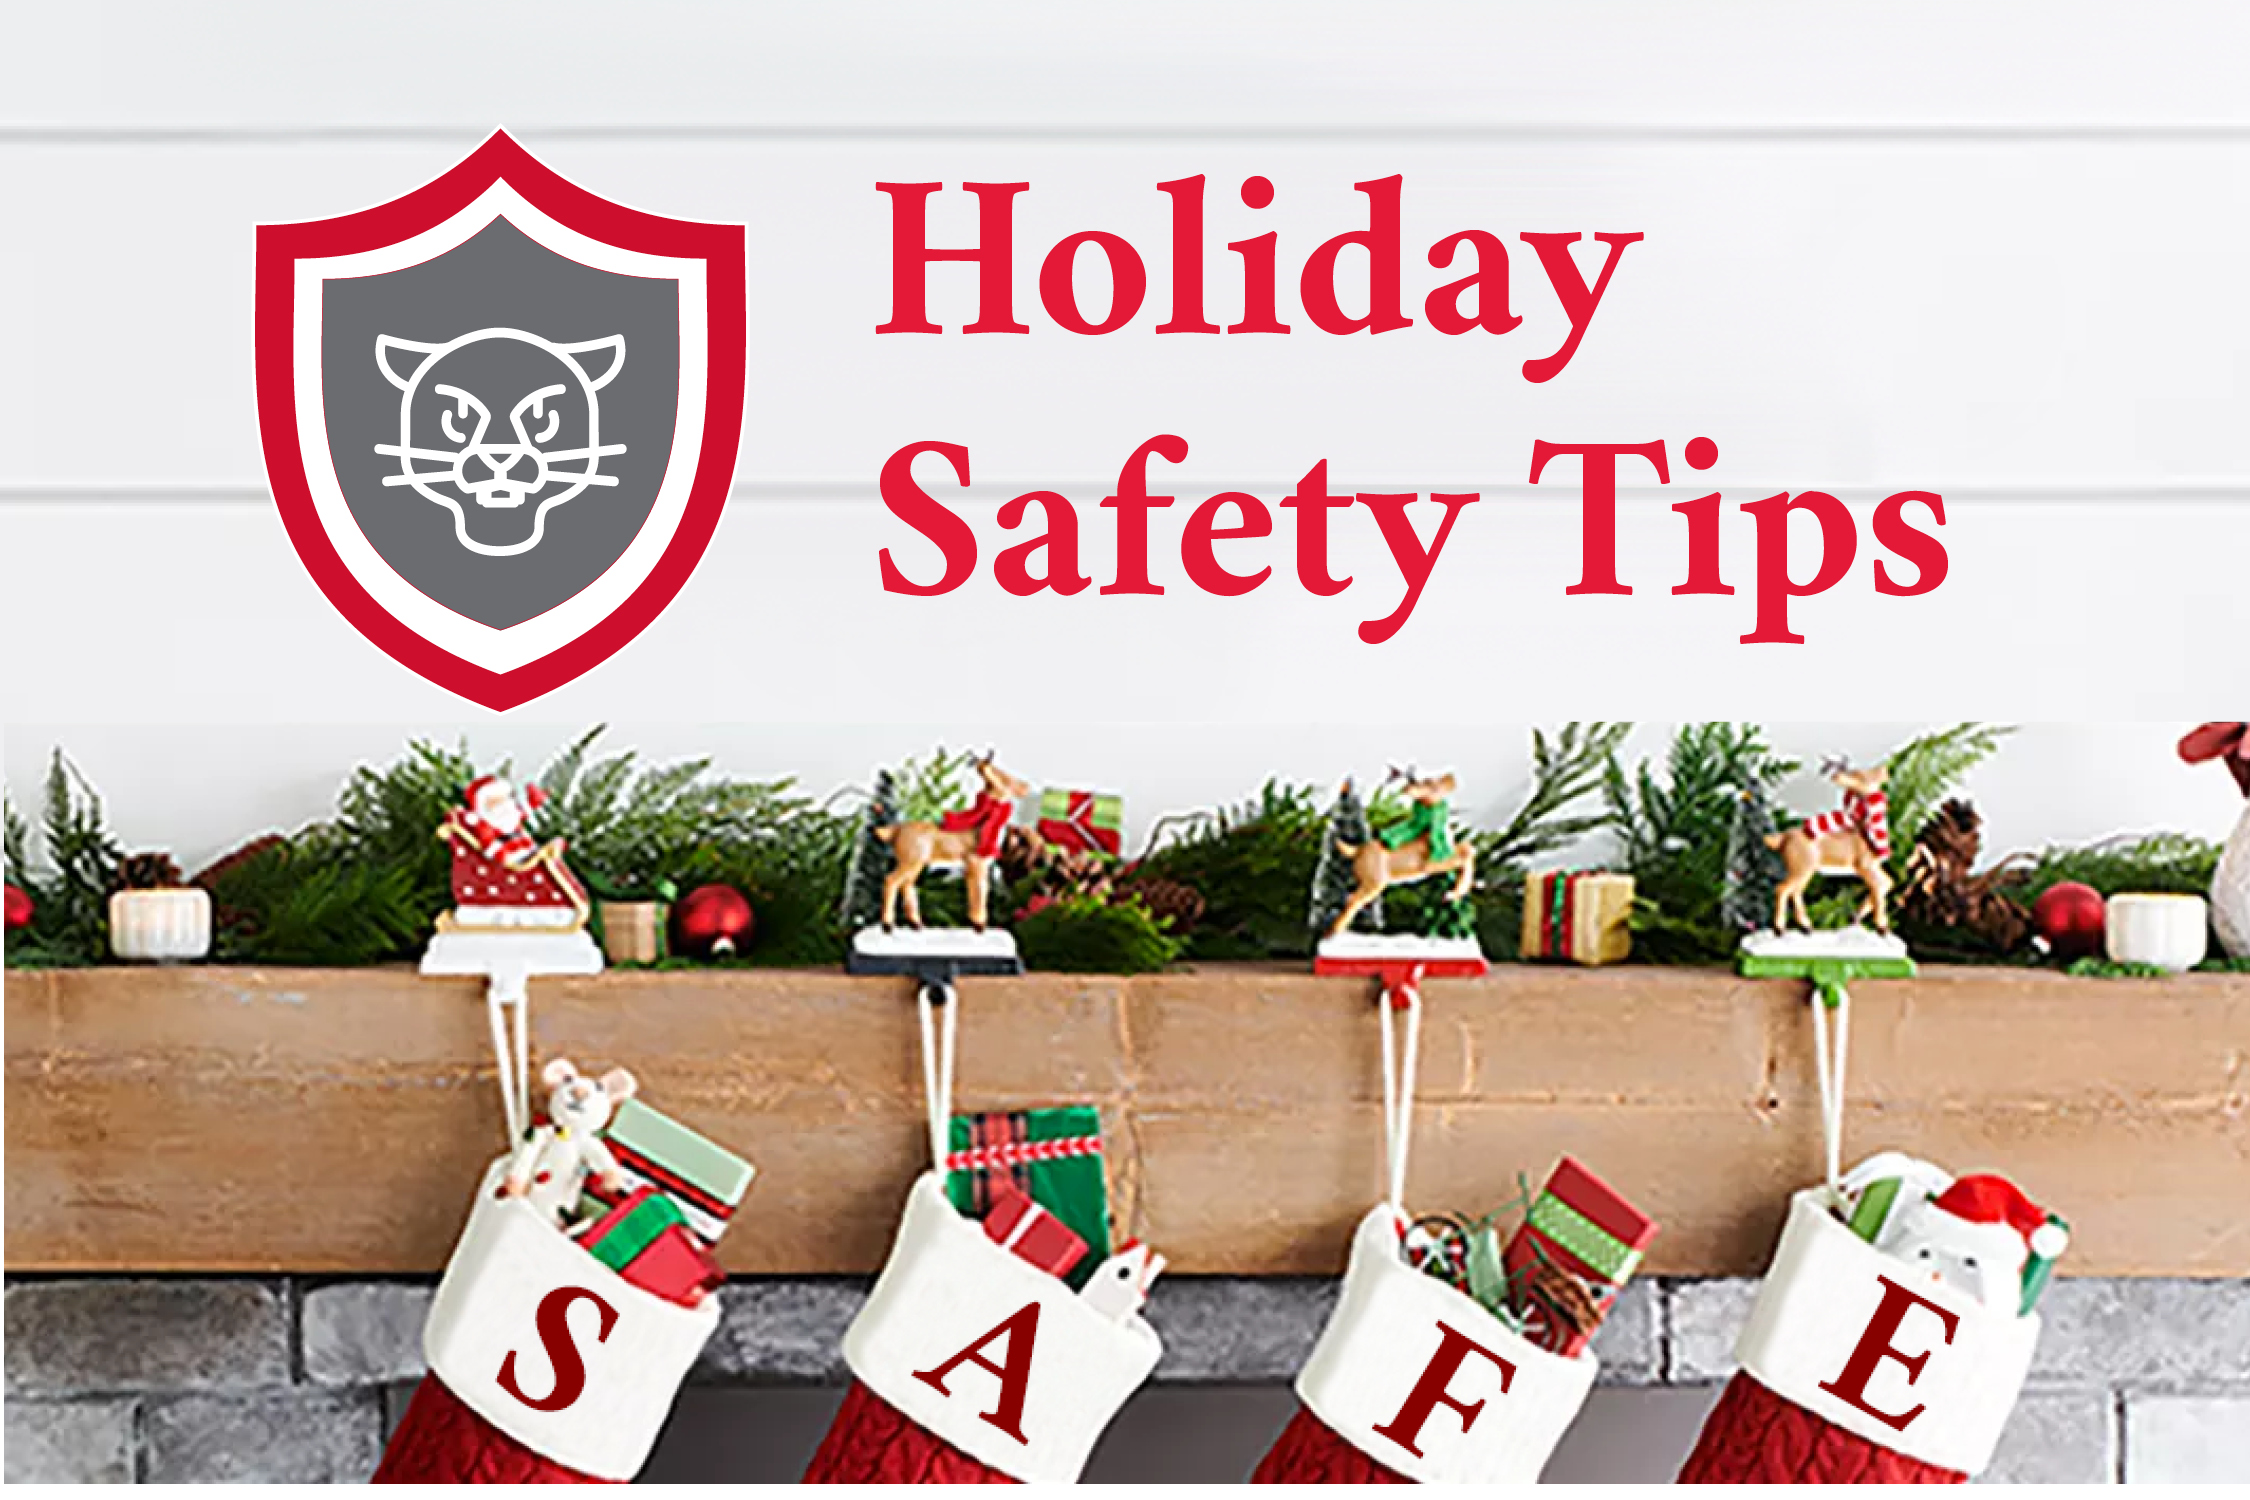 Holiday Safety tips graphic